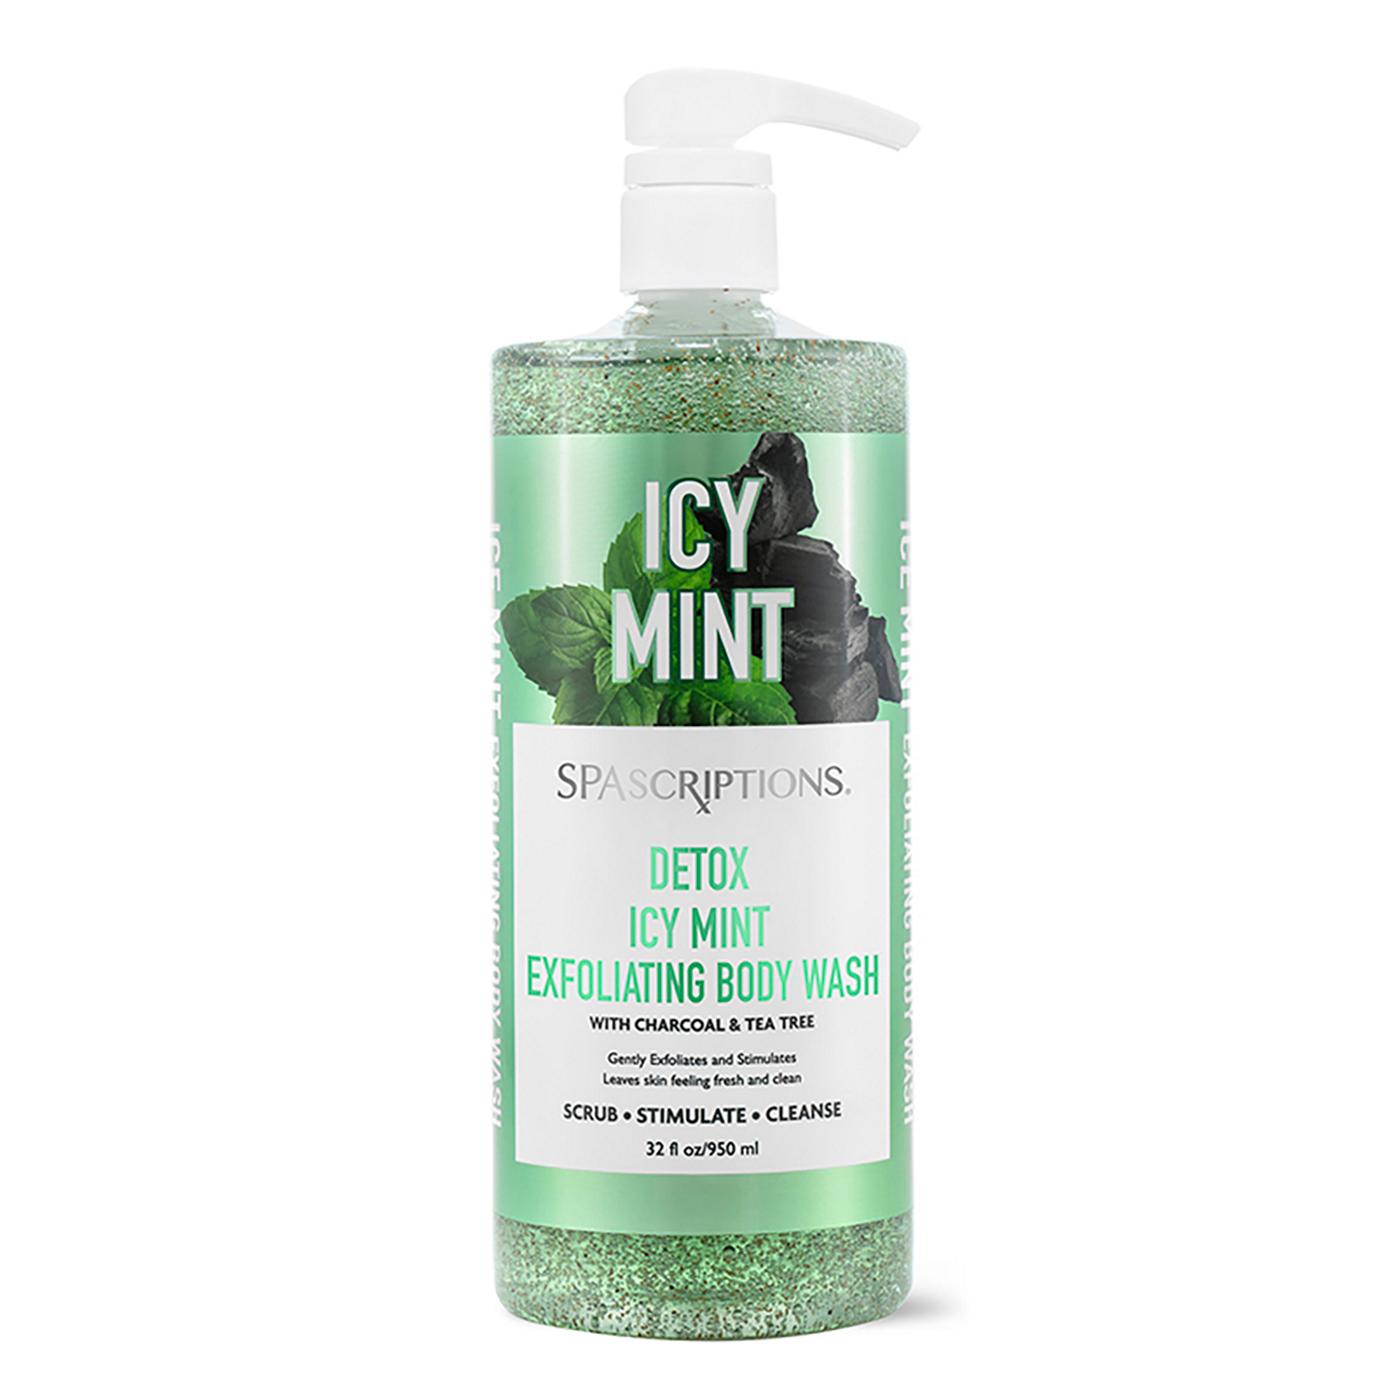 SpaScriptions Detox Exfoliating Body Wash -  Icy Mint; image 1 of 3